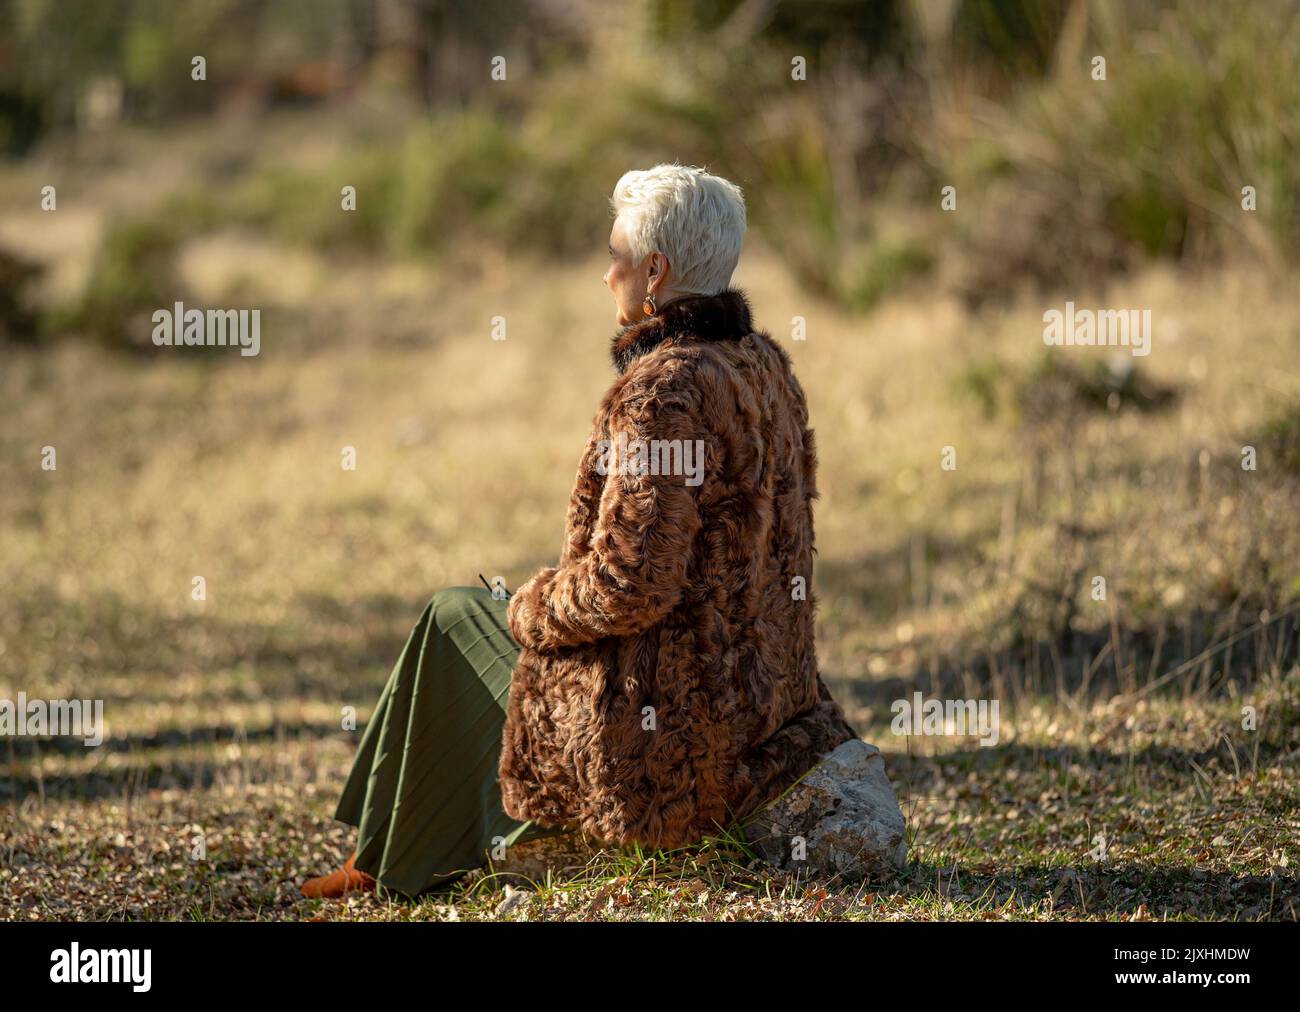 woman in a astrakhan fur coat on a cold autumn day looks into the distance. Stock Photo